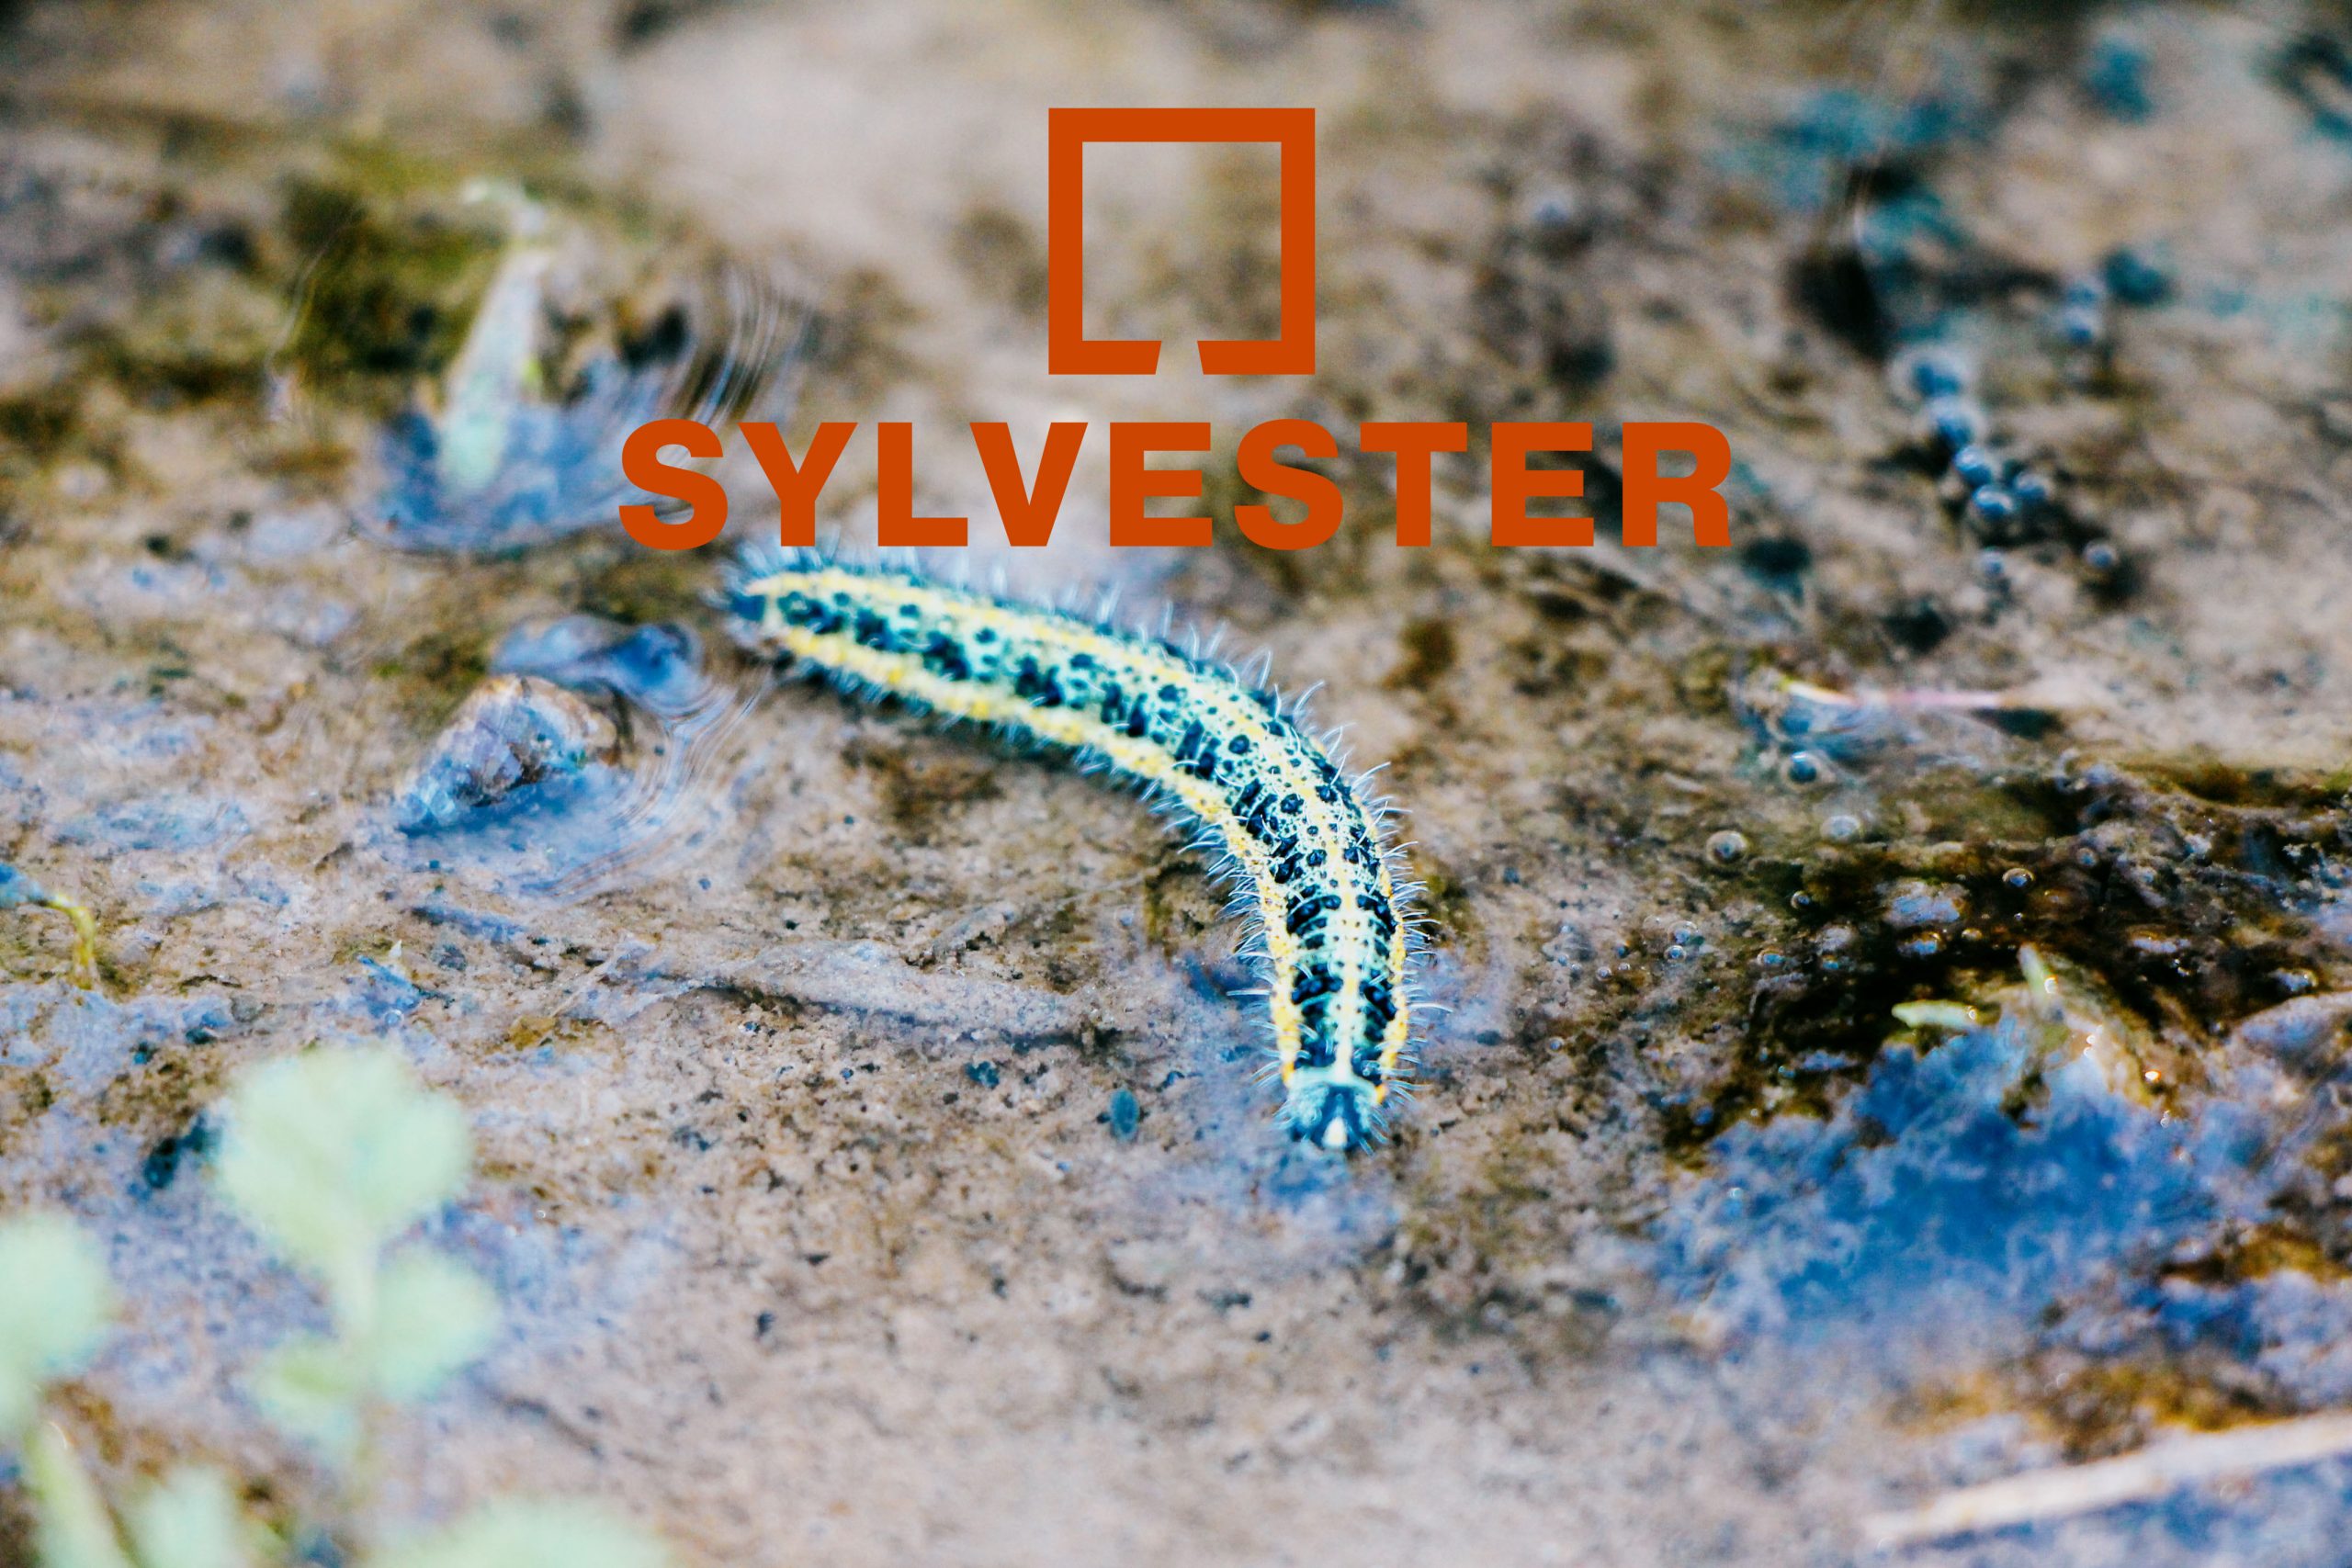 A colorful caterpillar on water and sand. Above it a logo and the name "Sylvester".